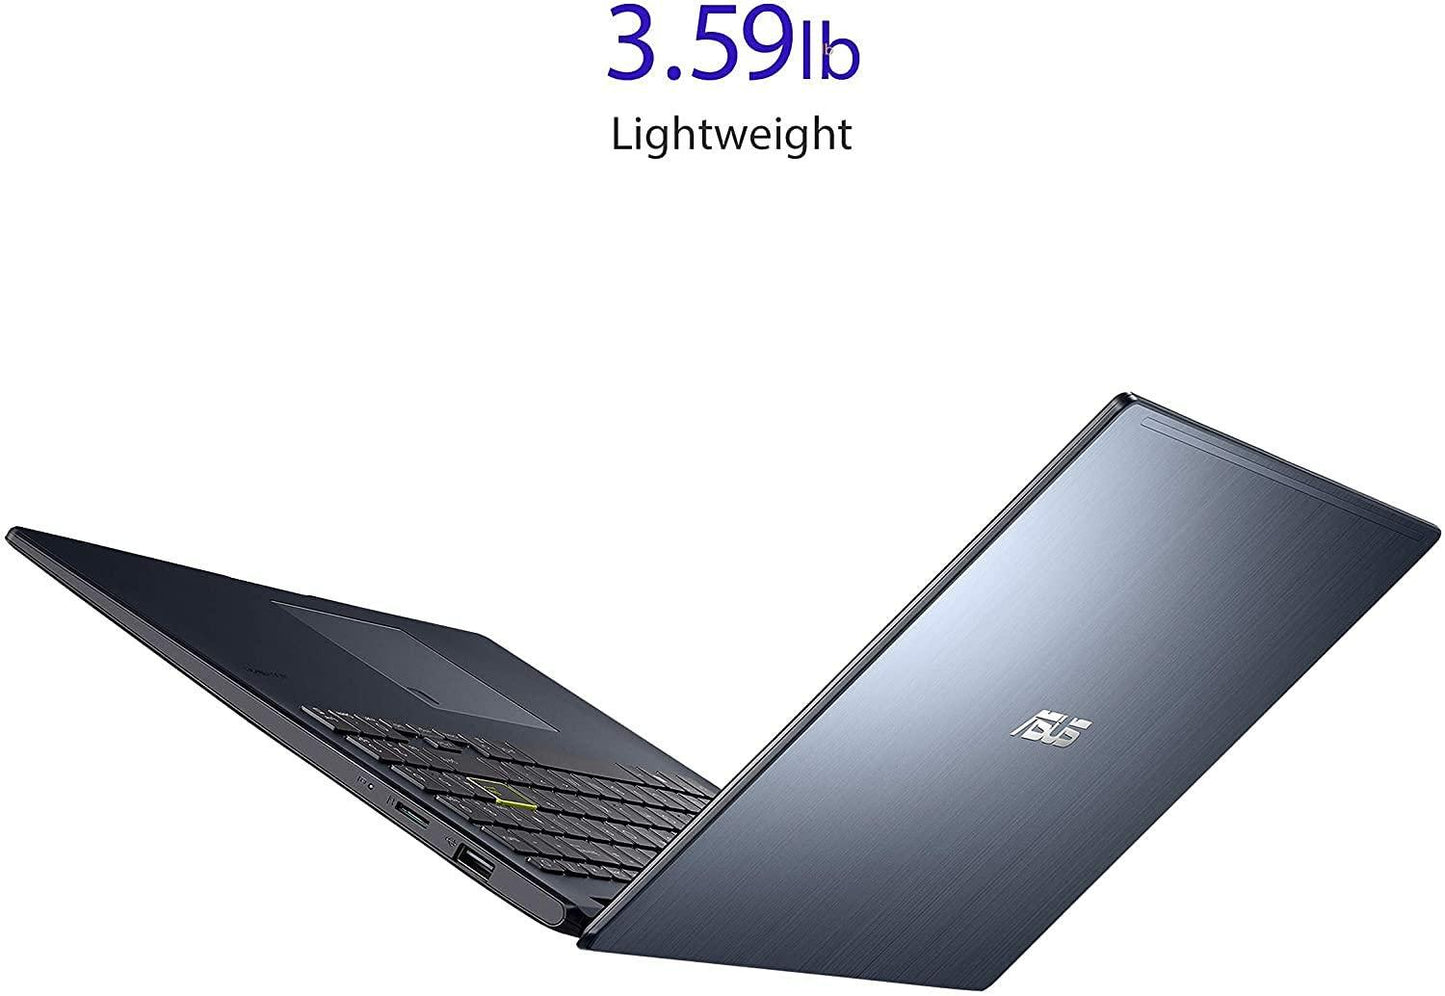 2021 ASUS L510 Ultra Thin Laptop, 15.6" FHD Display - Star Black - Store For Gamers